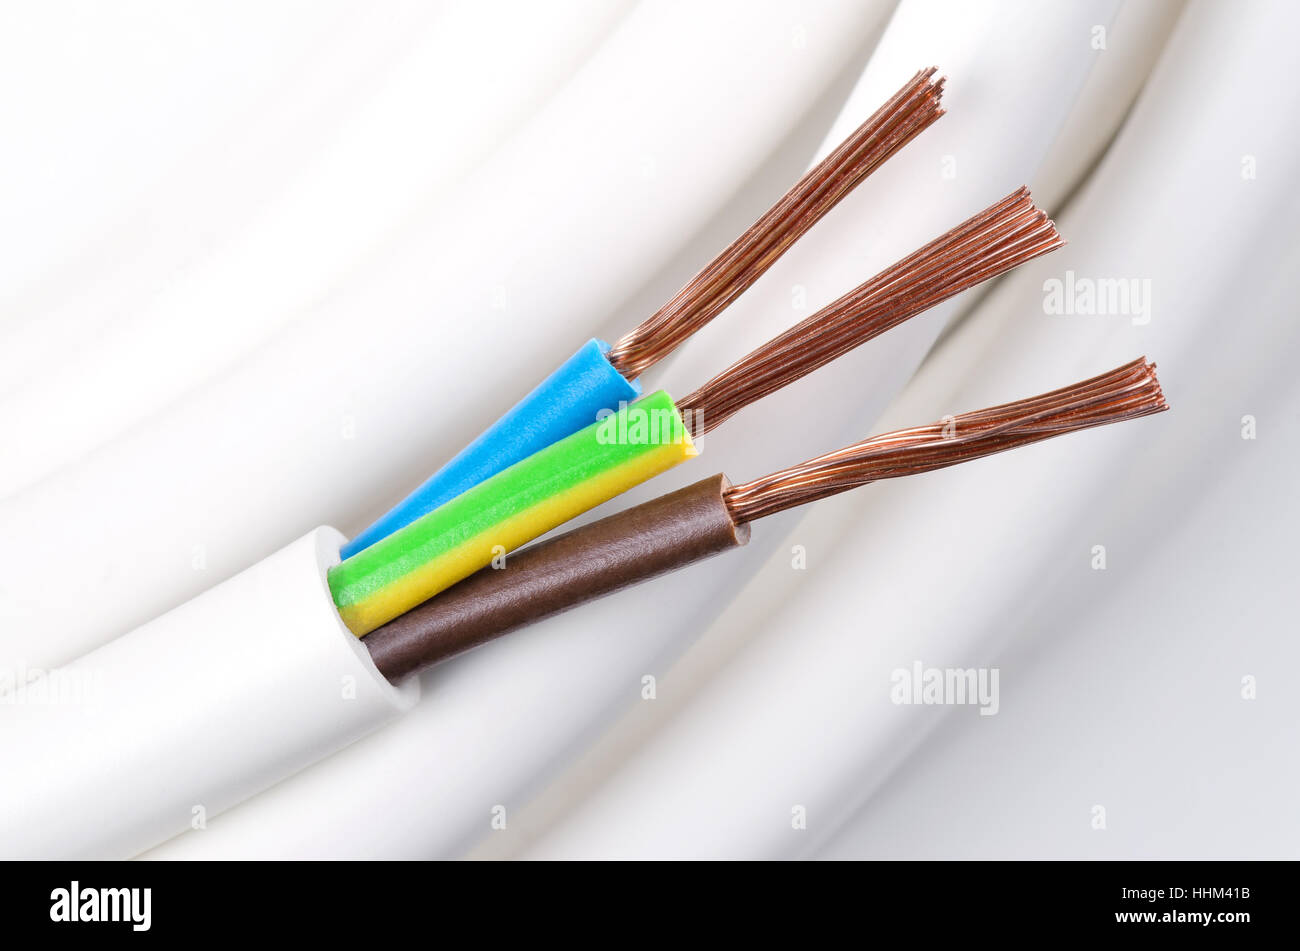 Electrical power cable macro photo. IEC standard color code. Cross-section with cable jacket, wire insulation. Stock Photo